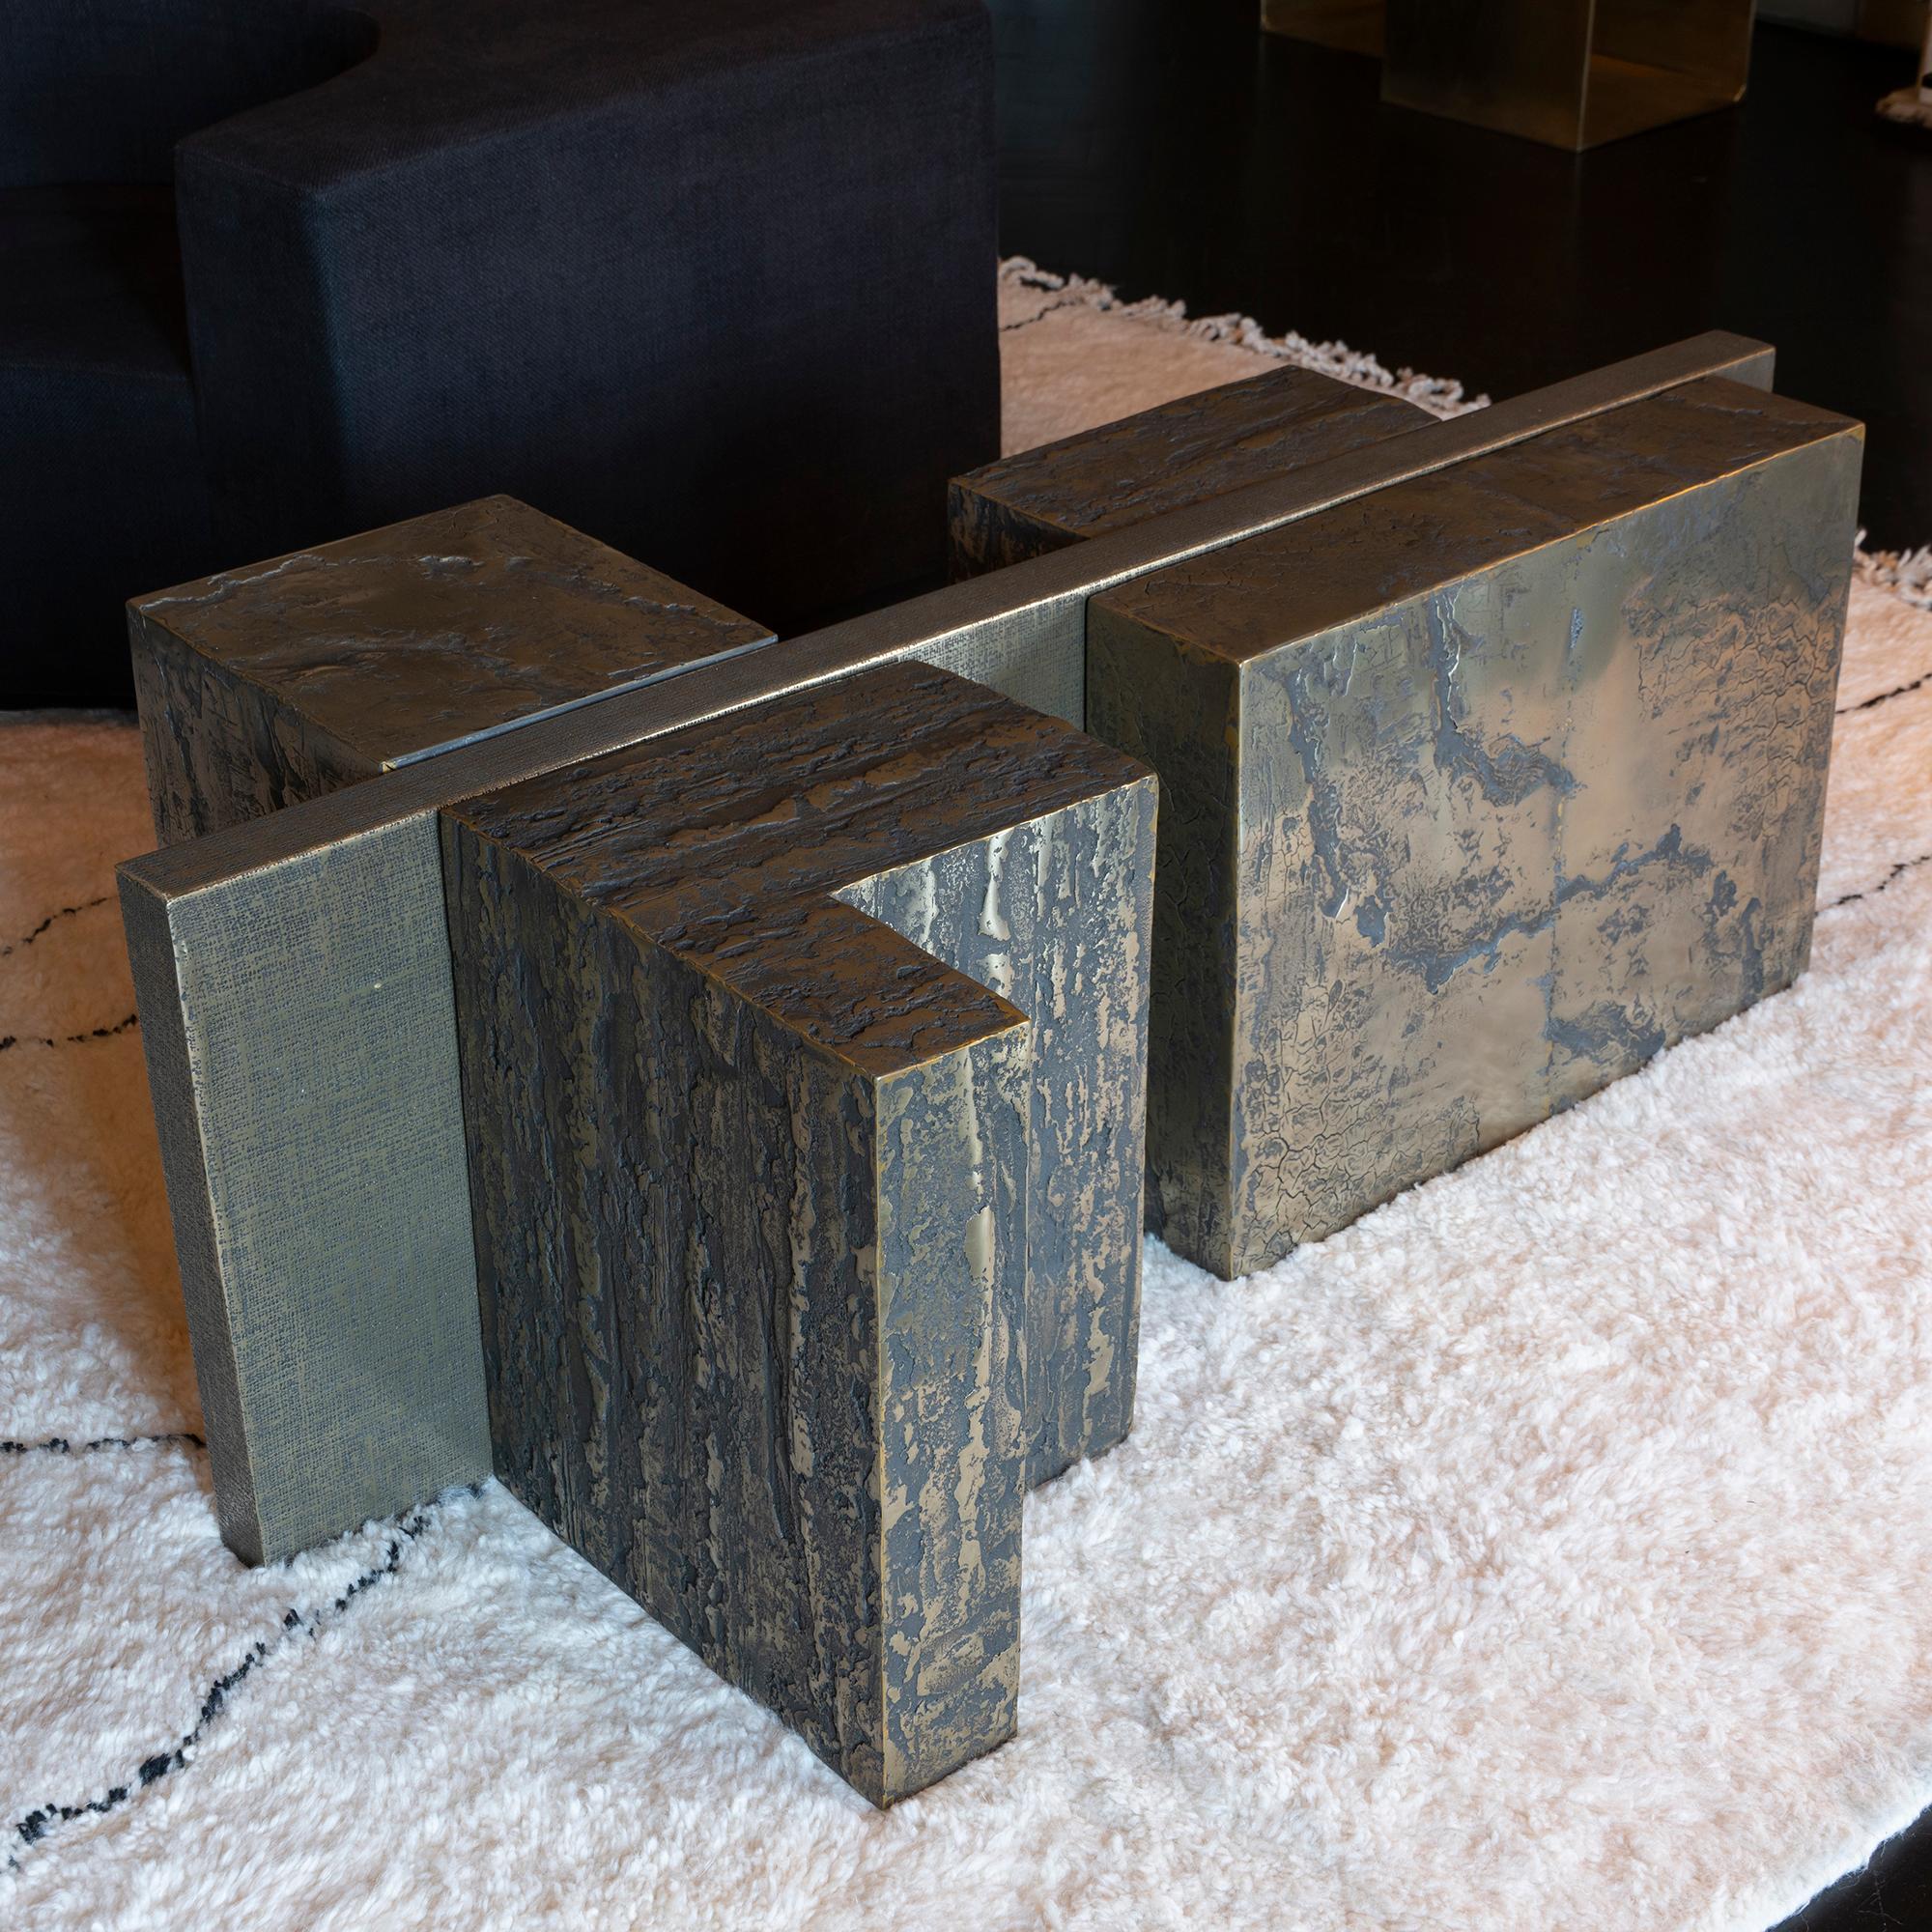 Part of the capsule collection created by Romano Zenoni for Flair, one of a kind coffee table realized in different textured patterns in resin, brass, bronze and jute, grey fumé tempered glass top cm 140 x 50, Italy, 2019.